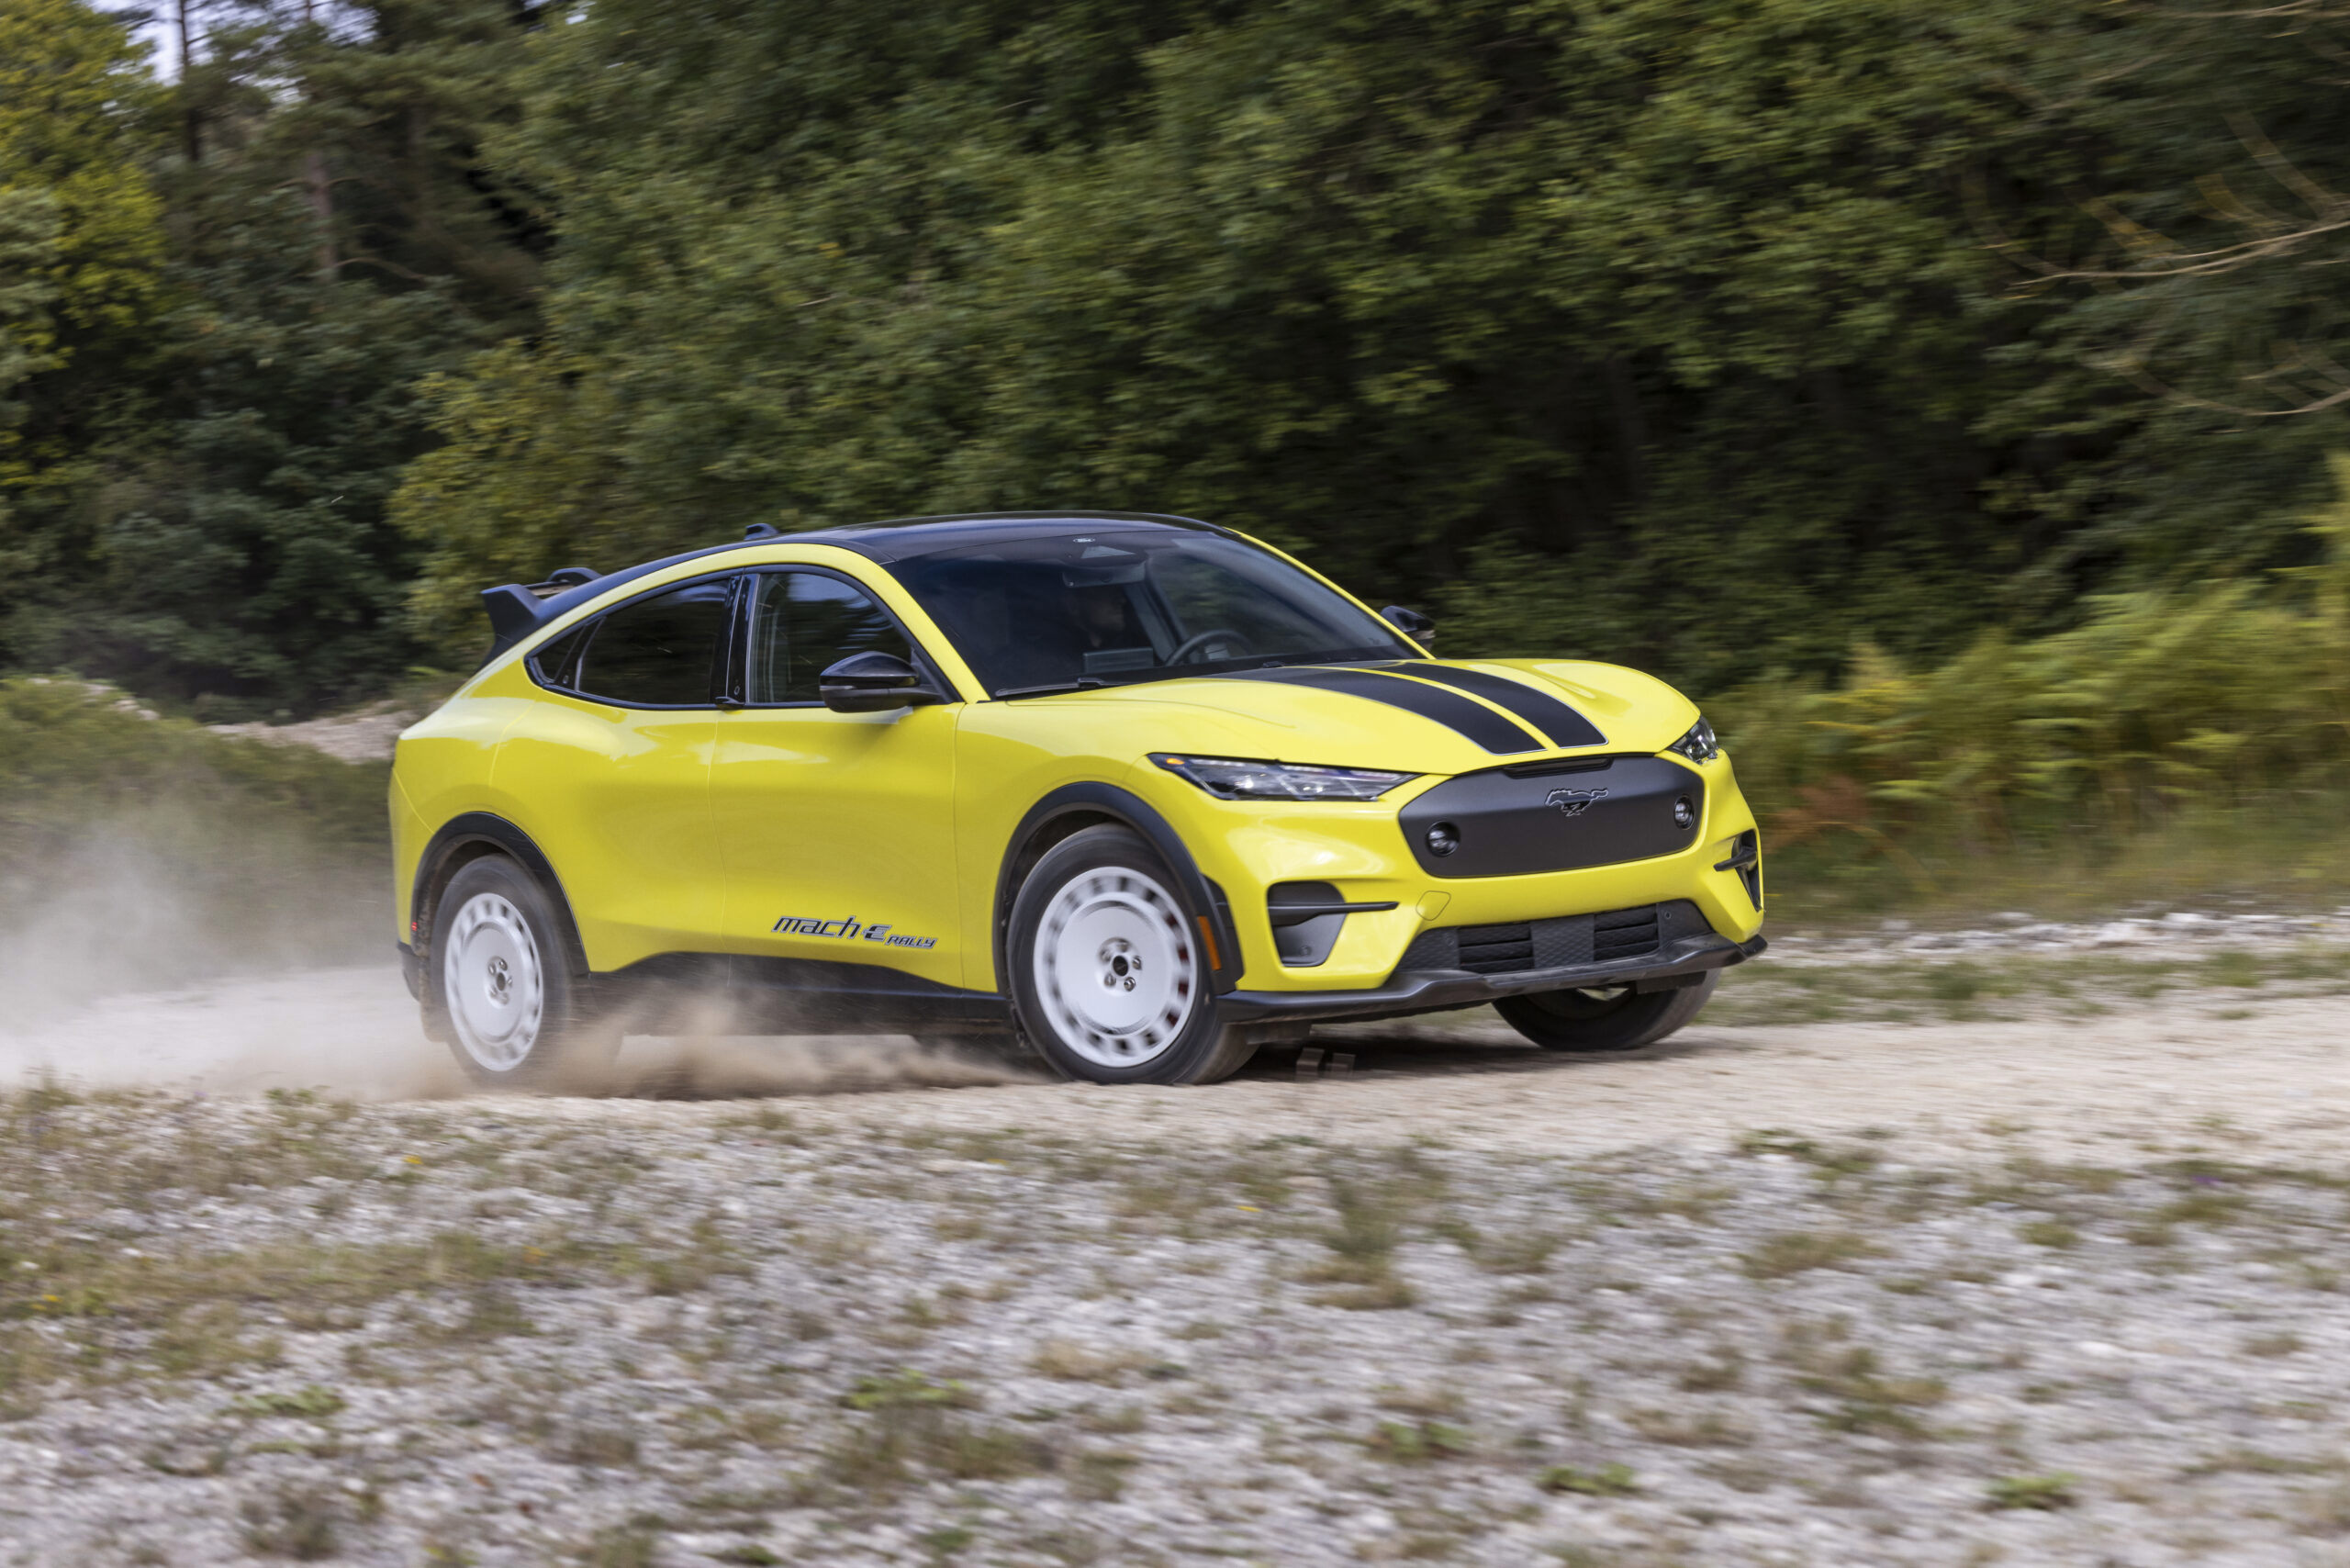 Fords Electric Mustang Suv Gets Dirt Road Rally Variant